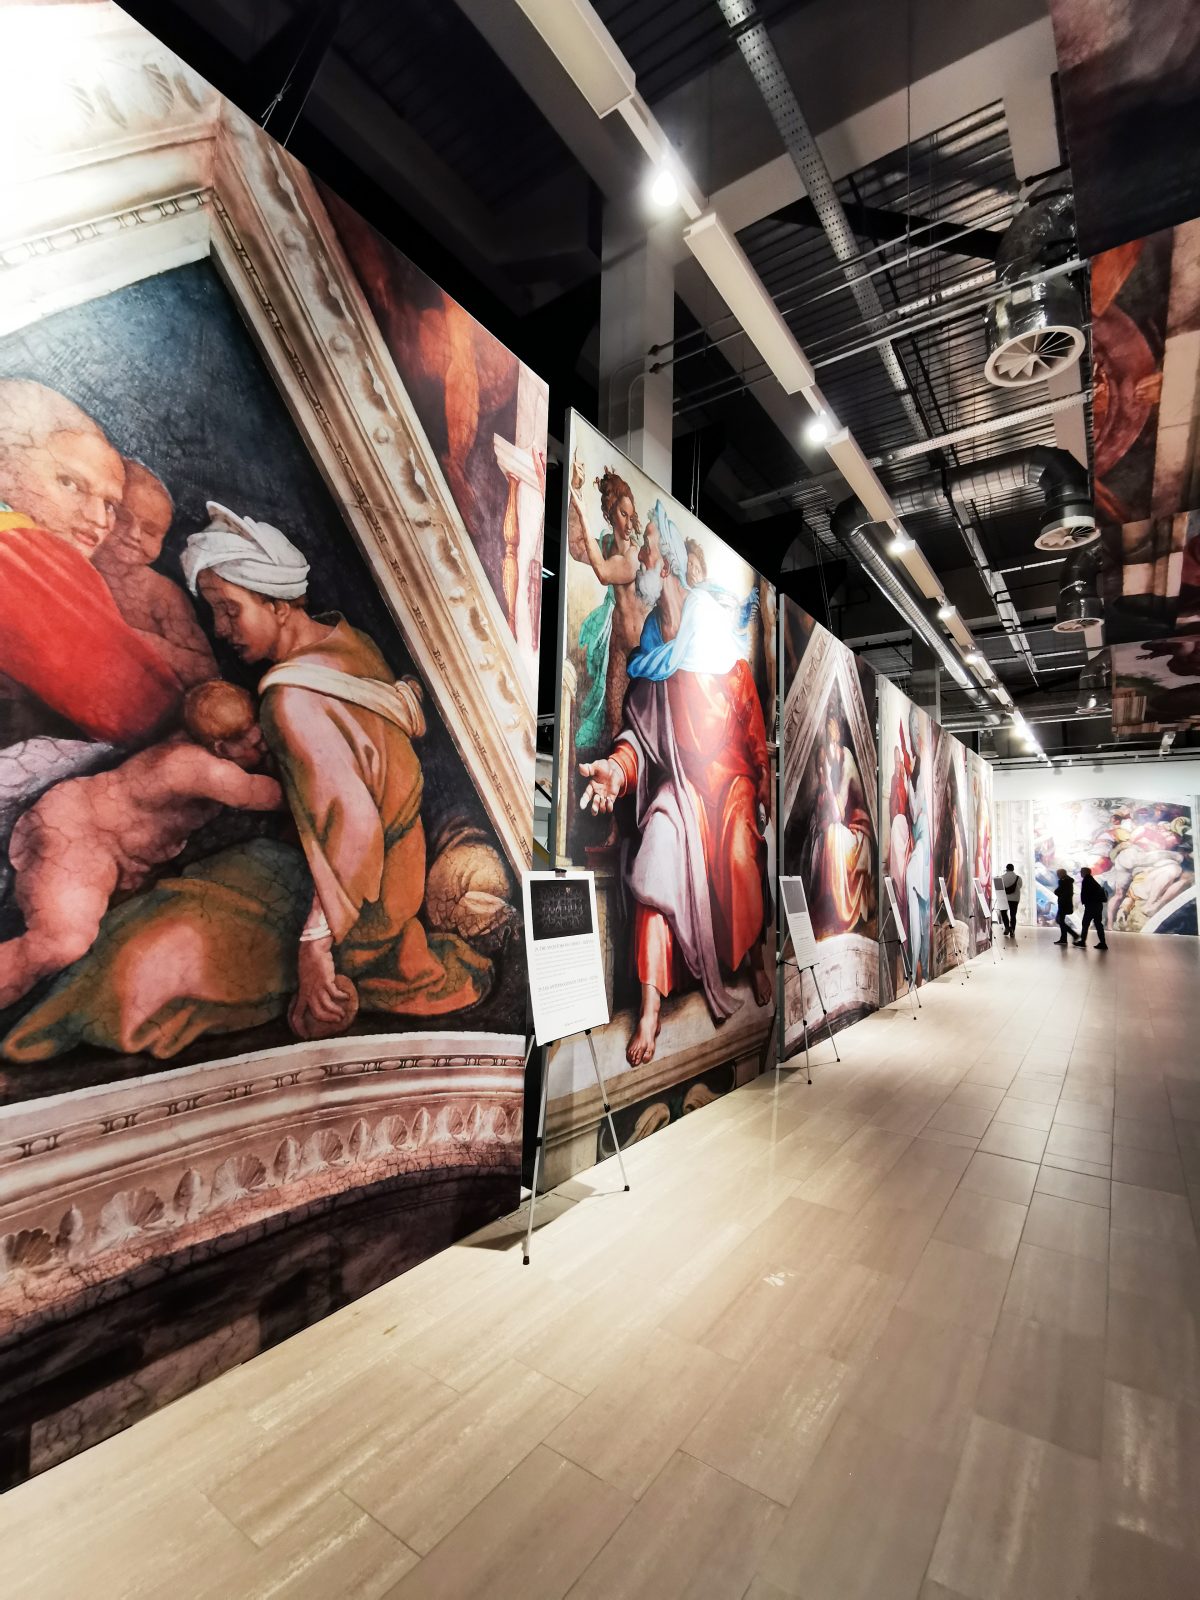 The ceiling of the Sistine Chapel has been recreated in a new art experience in Greater Manchester, The Manc